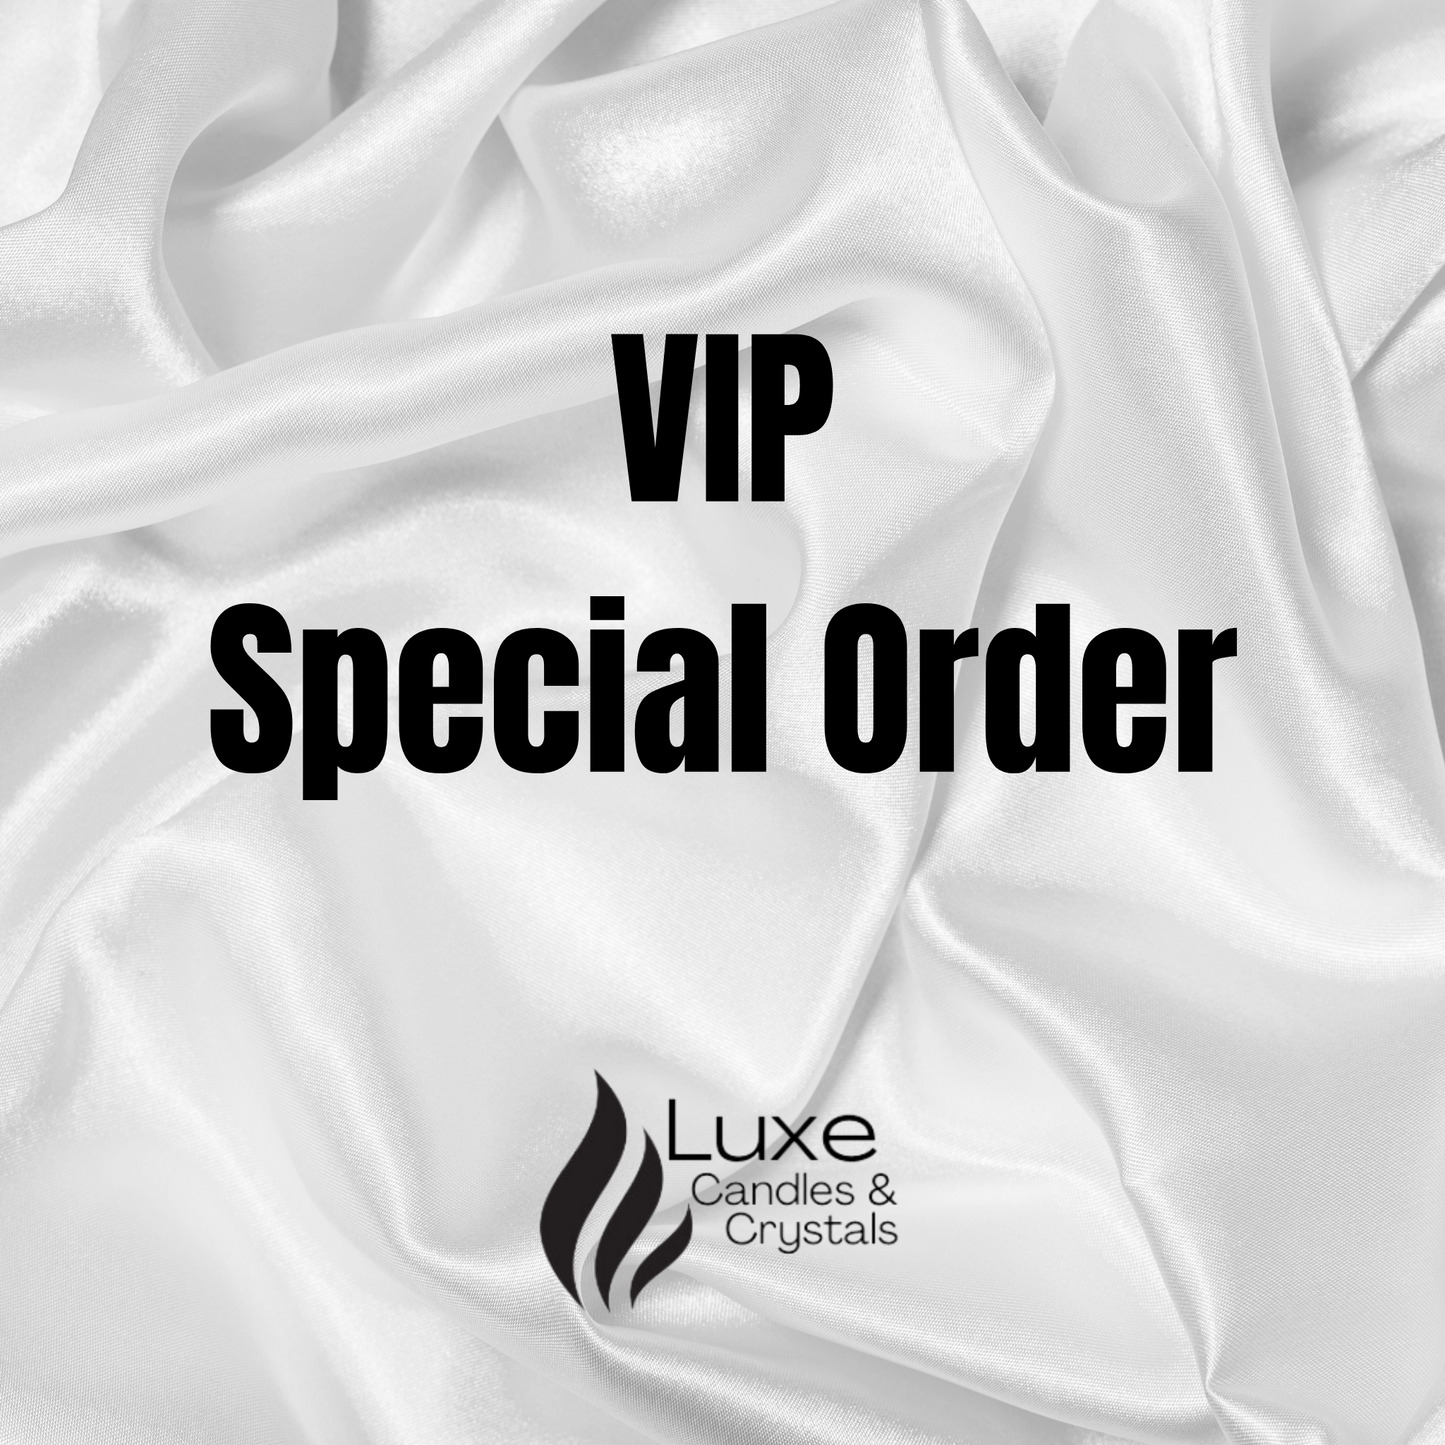 VIP Special Order